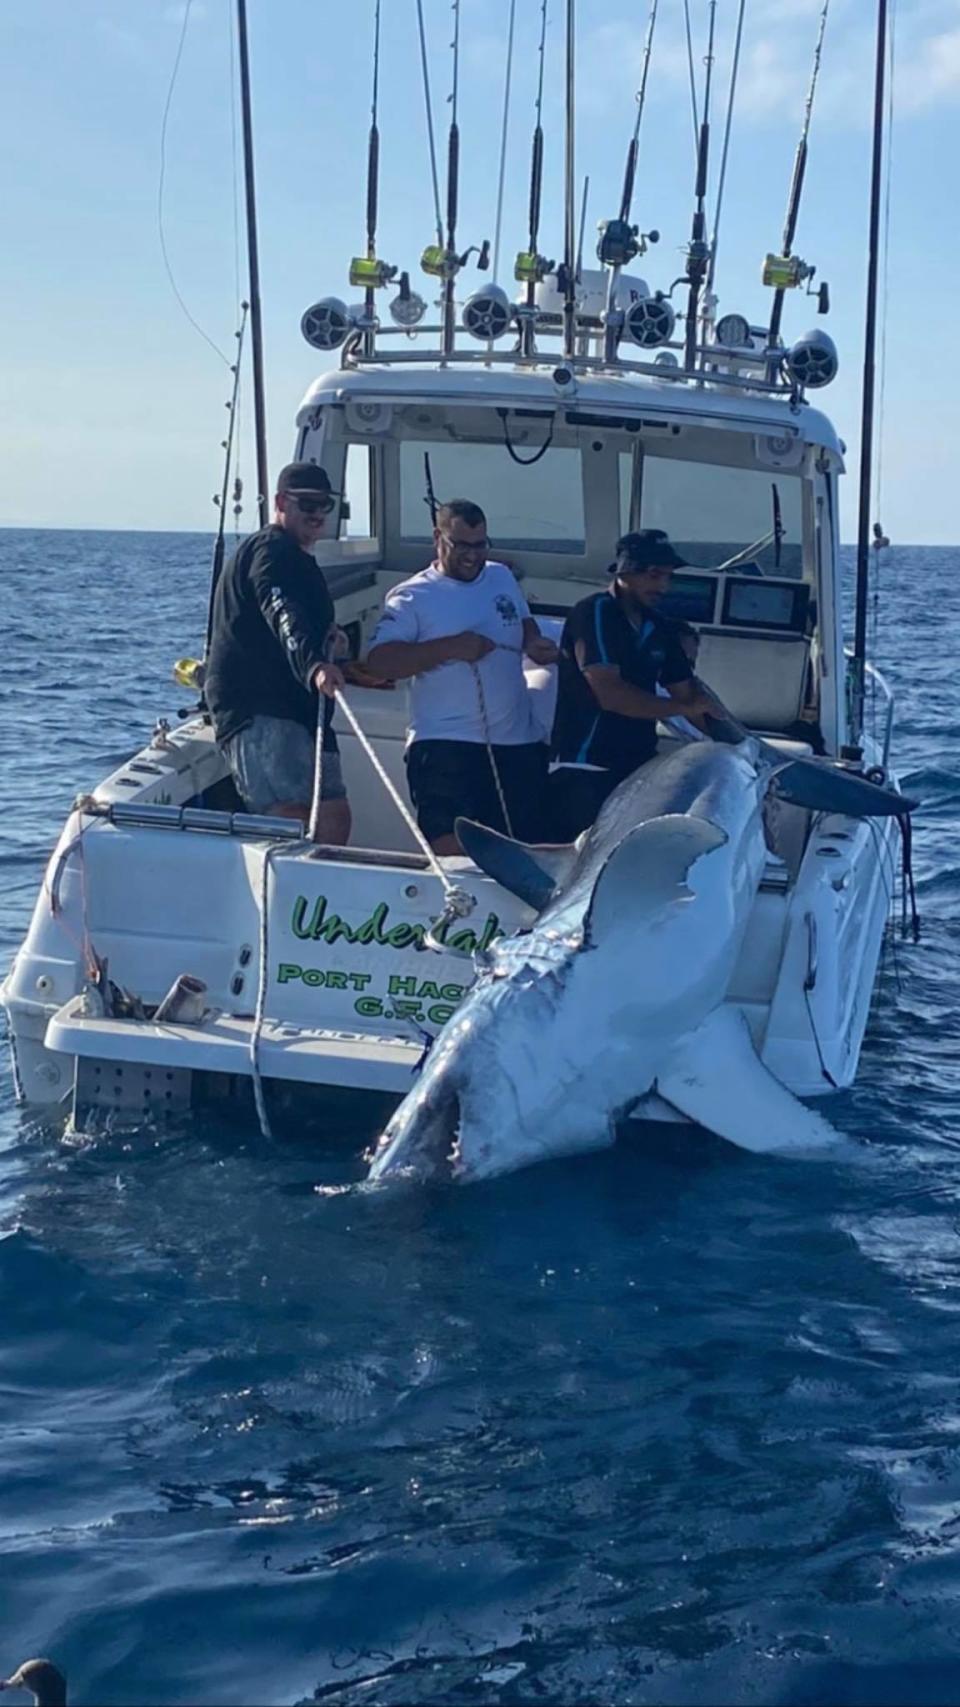 A large shark on the back of a Sydney fishing boat with three men hauling it up.